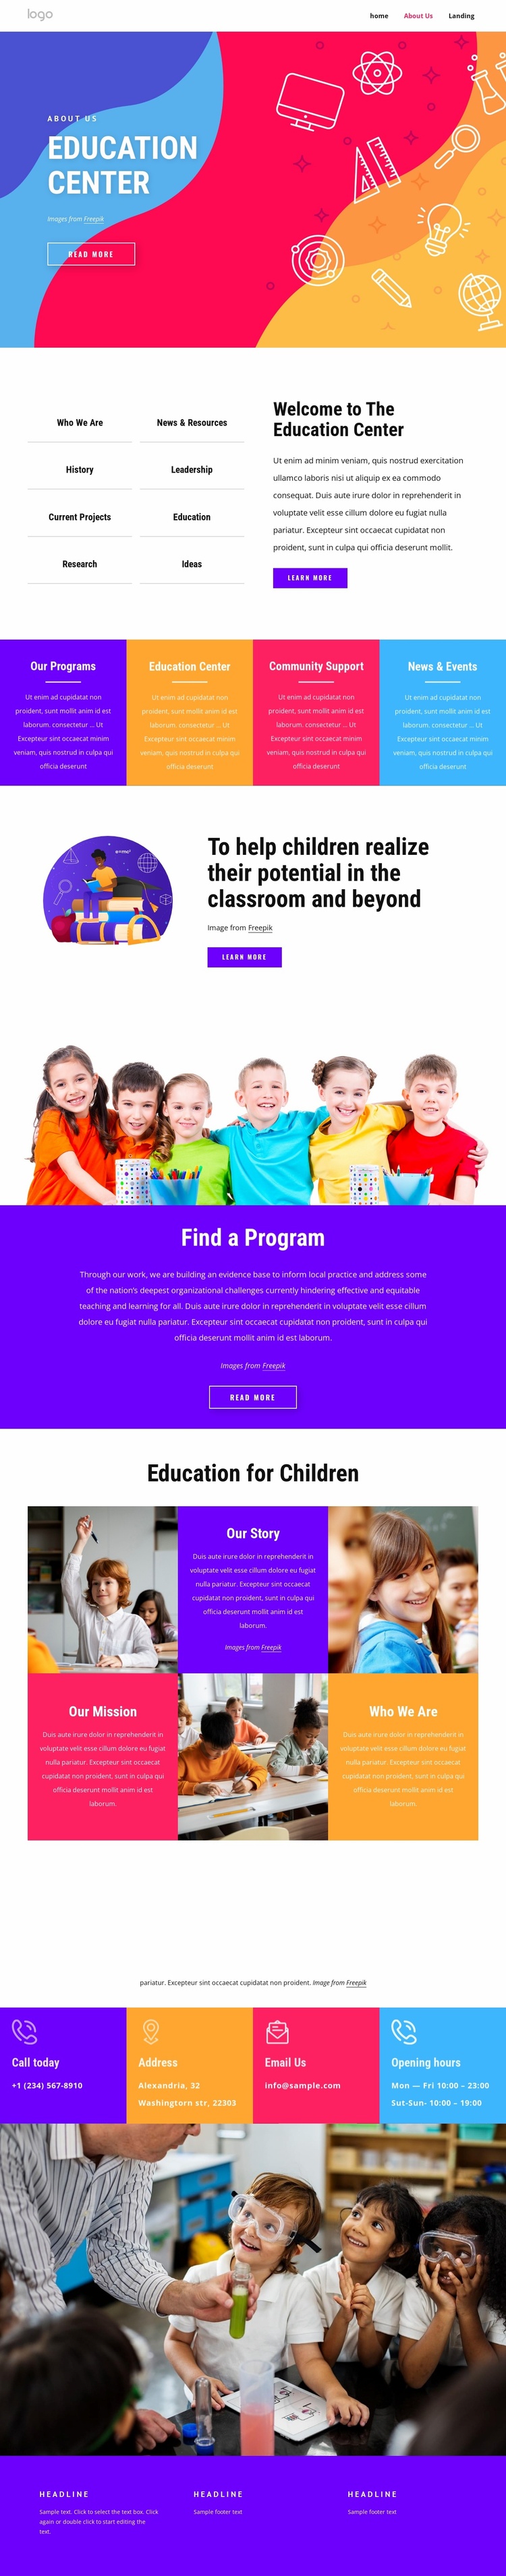 Family and education center Ecommerce Website Design